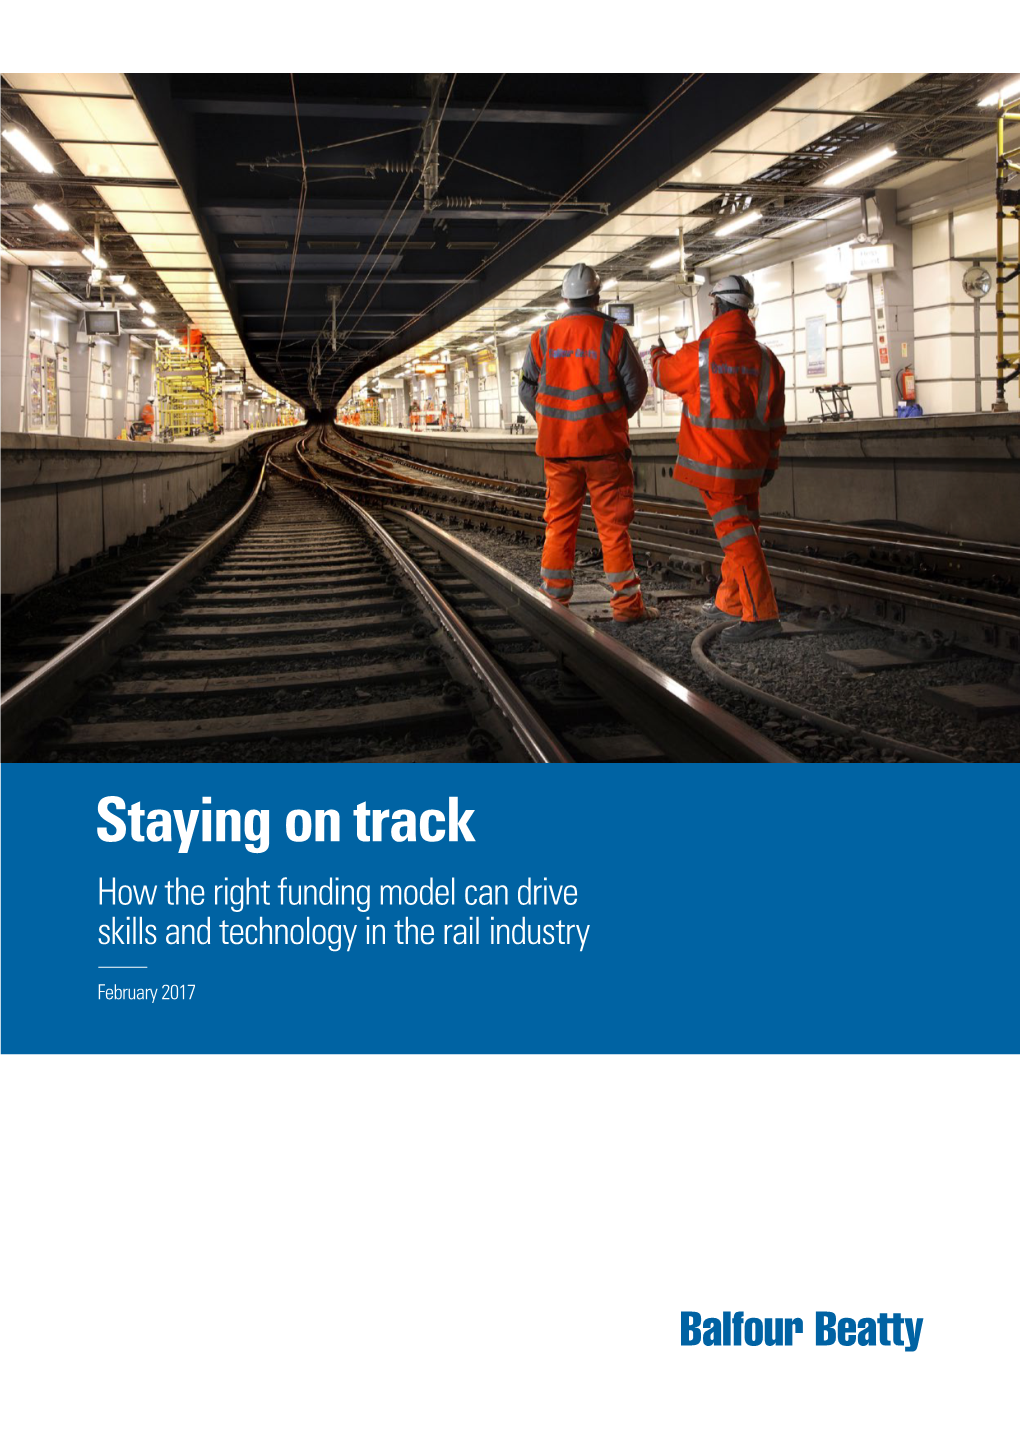 Staying on Track How the Right Funding Model Can Drive Skills and Technology in the Rail Industry